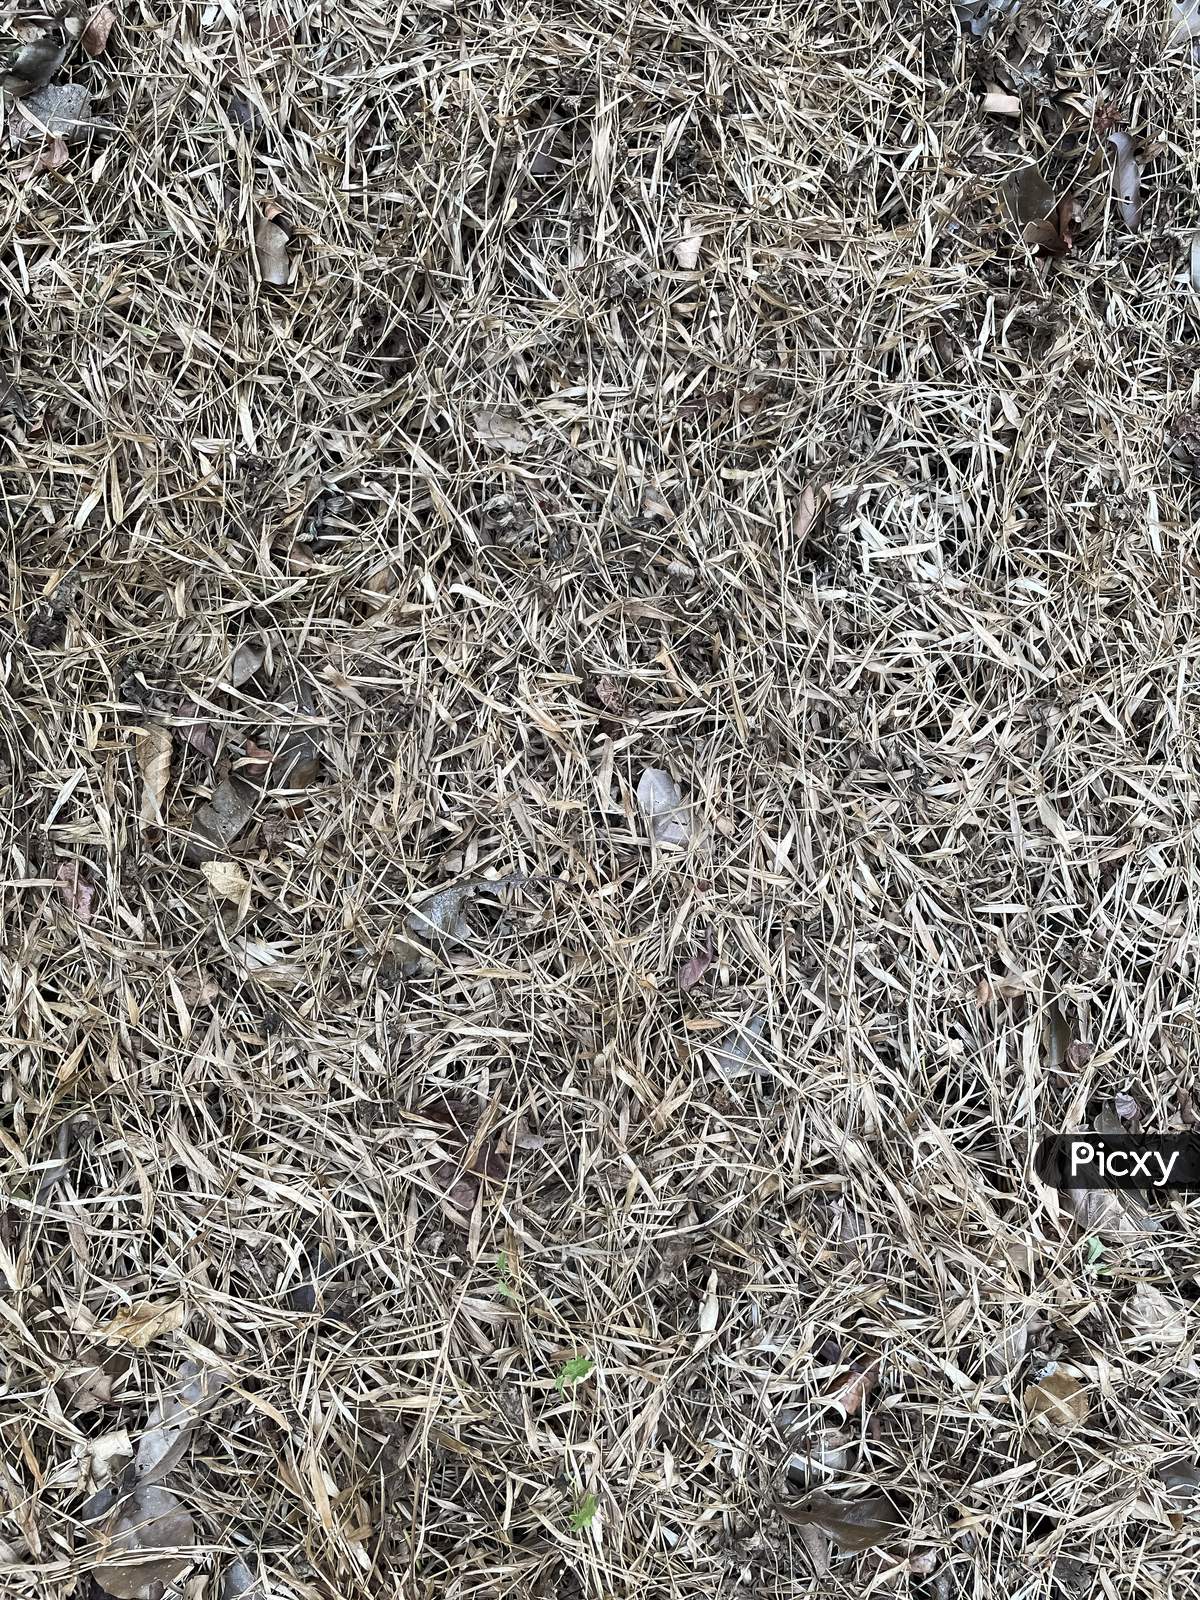 Texture Of Dried Grass Ground.Grass Dried Up By Intense Heat Of Sun.